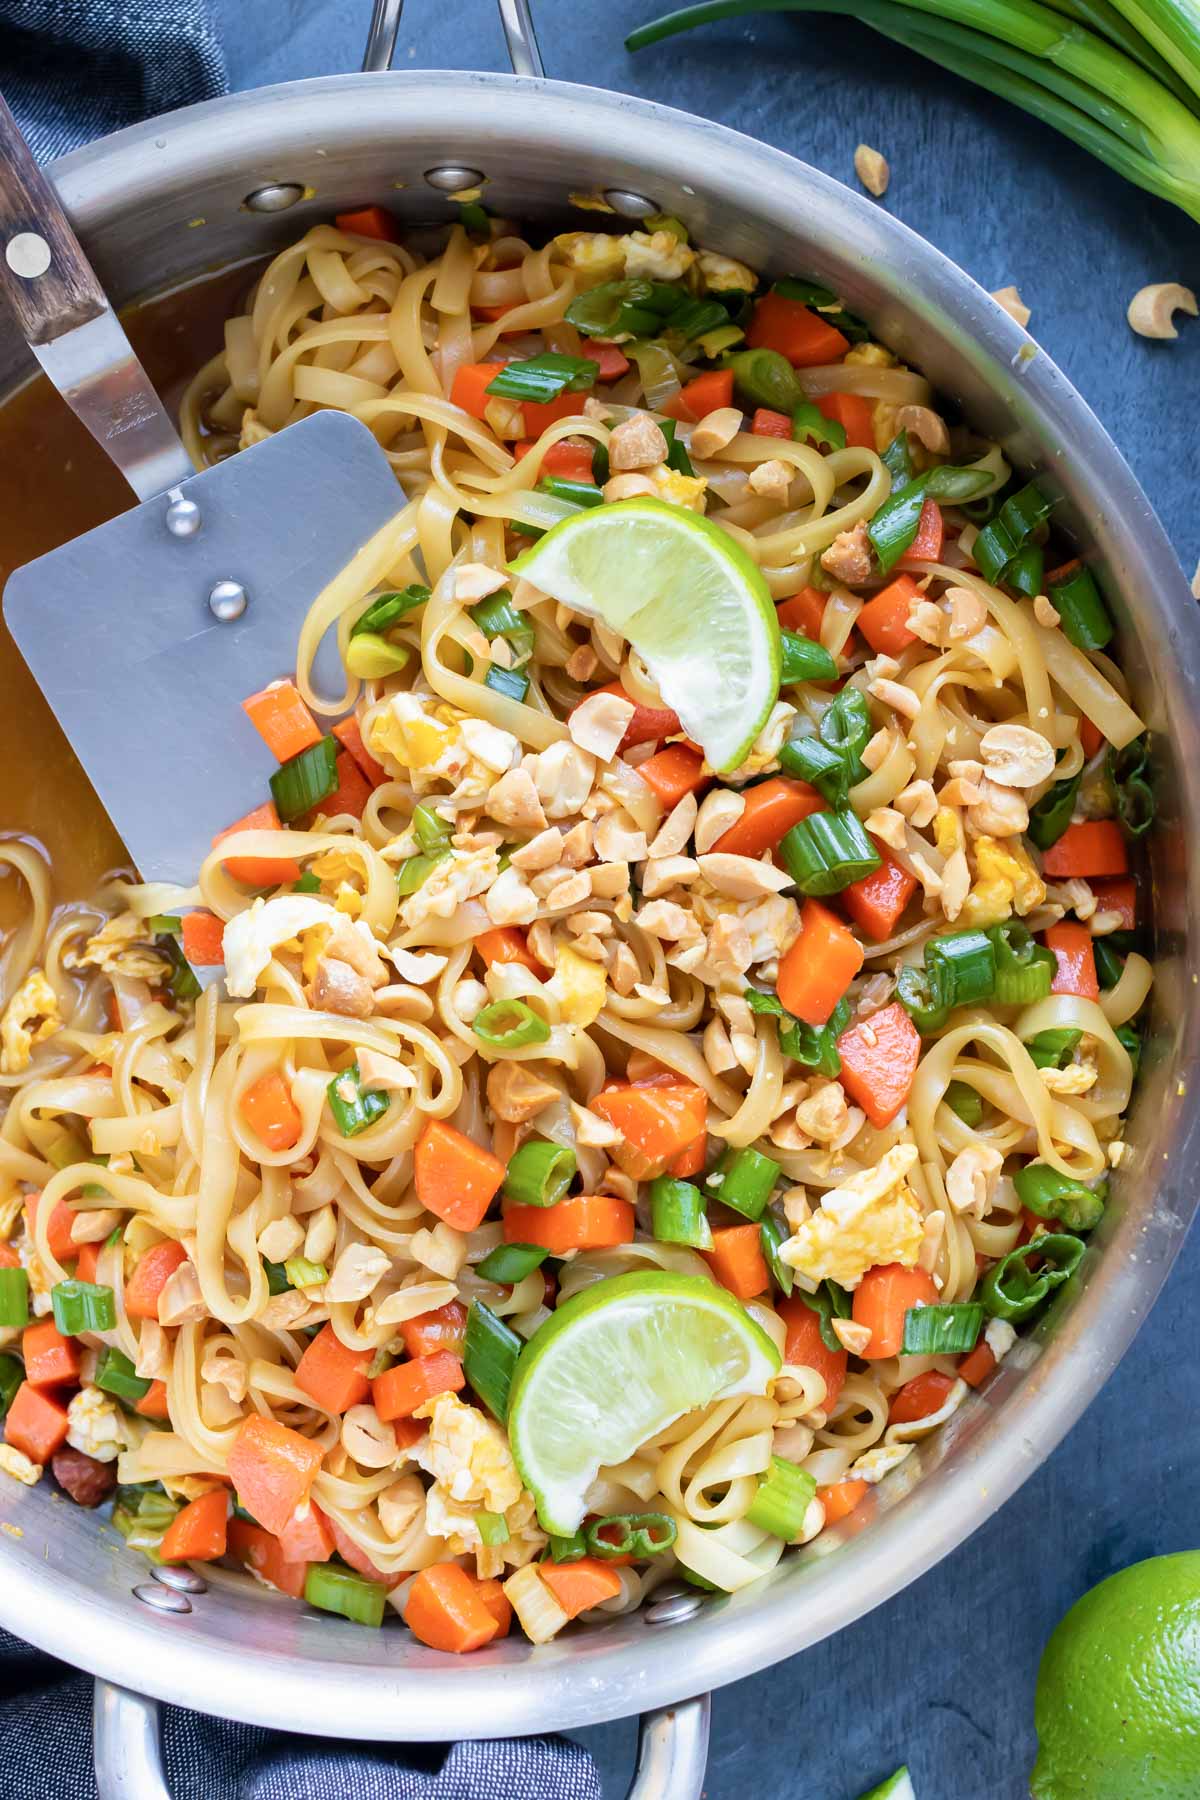 A large skillet full of a vegetarian Pad Thai recipe with limes.